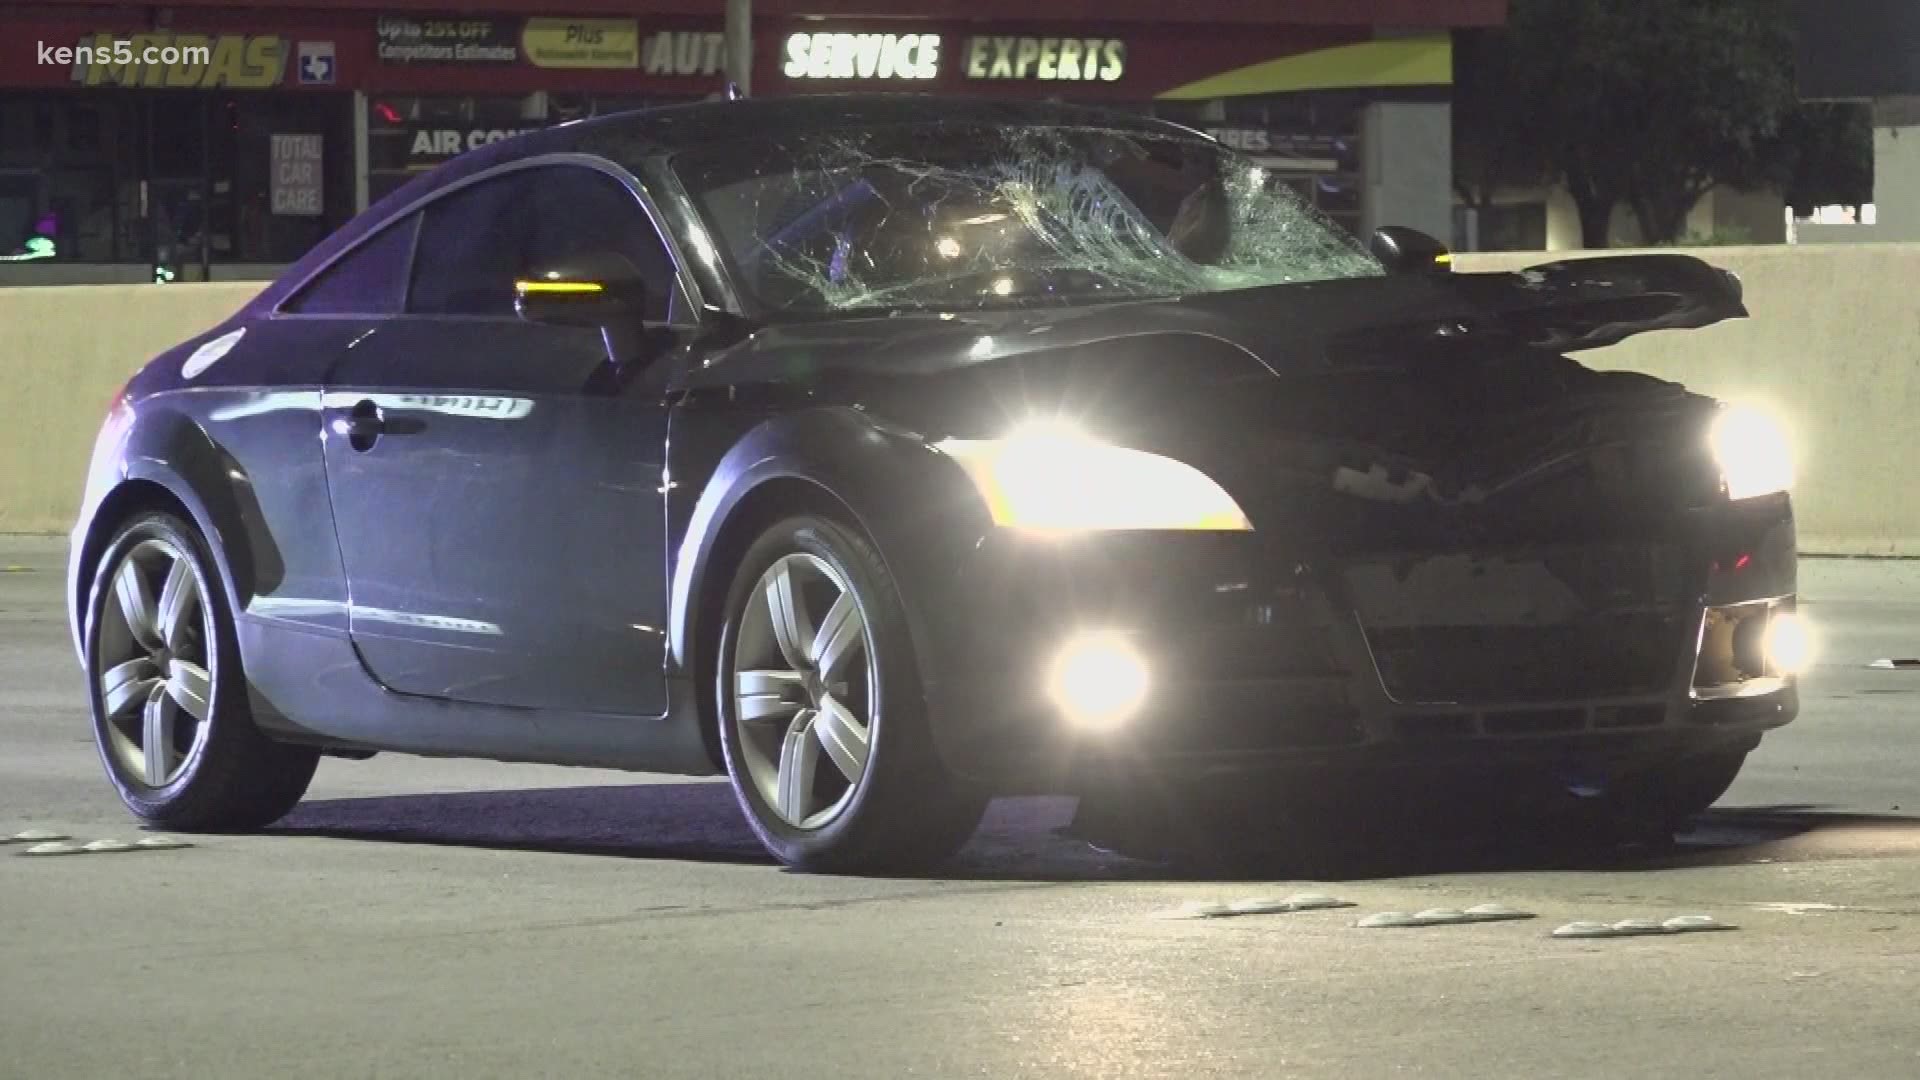 An 18-year-old was hit by a car along Loop 410 near W Military overnight.